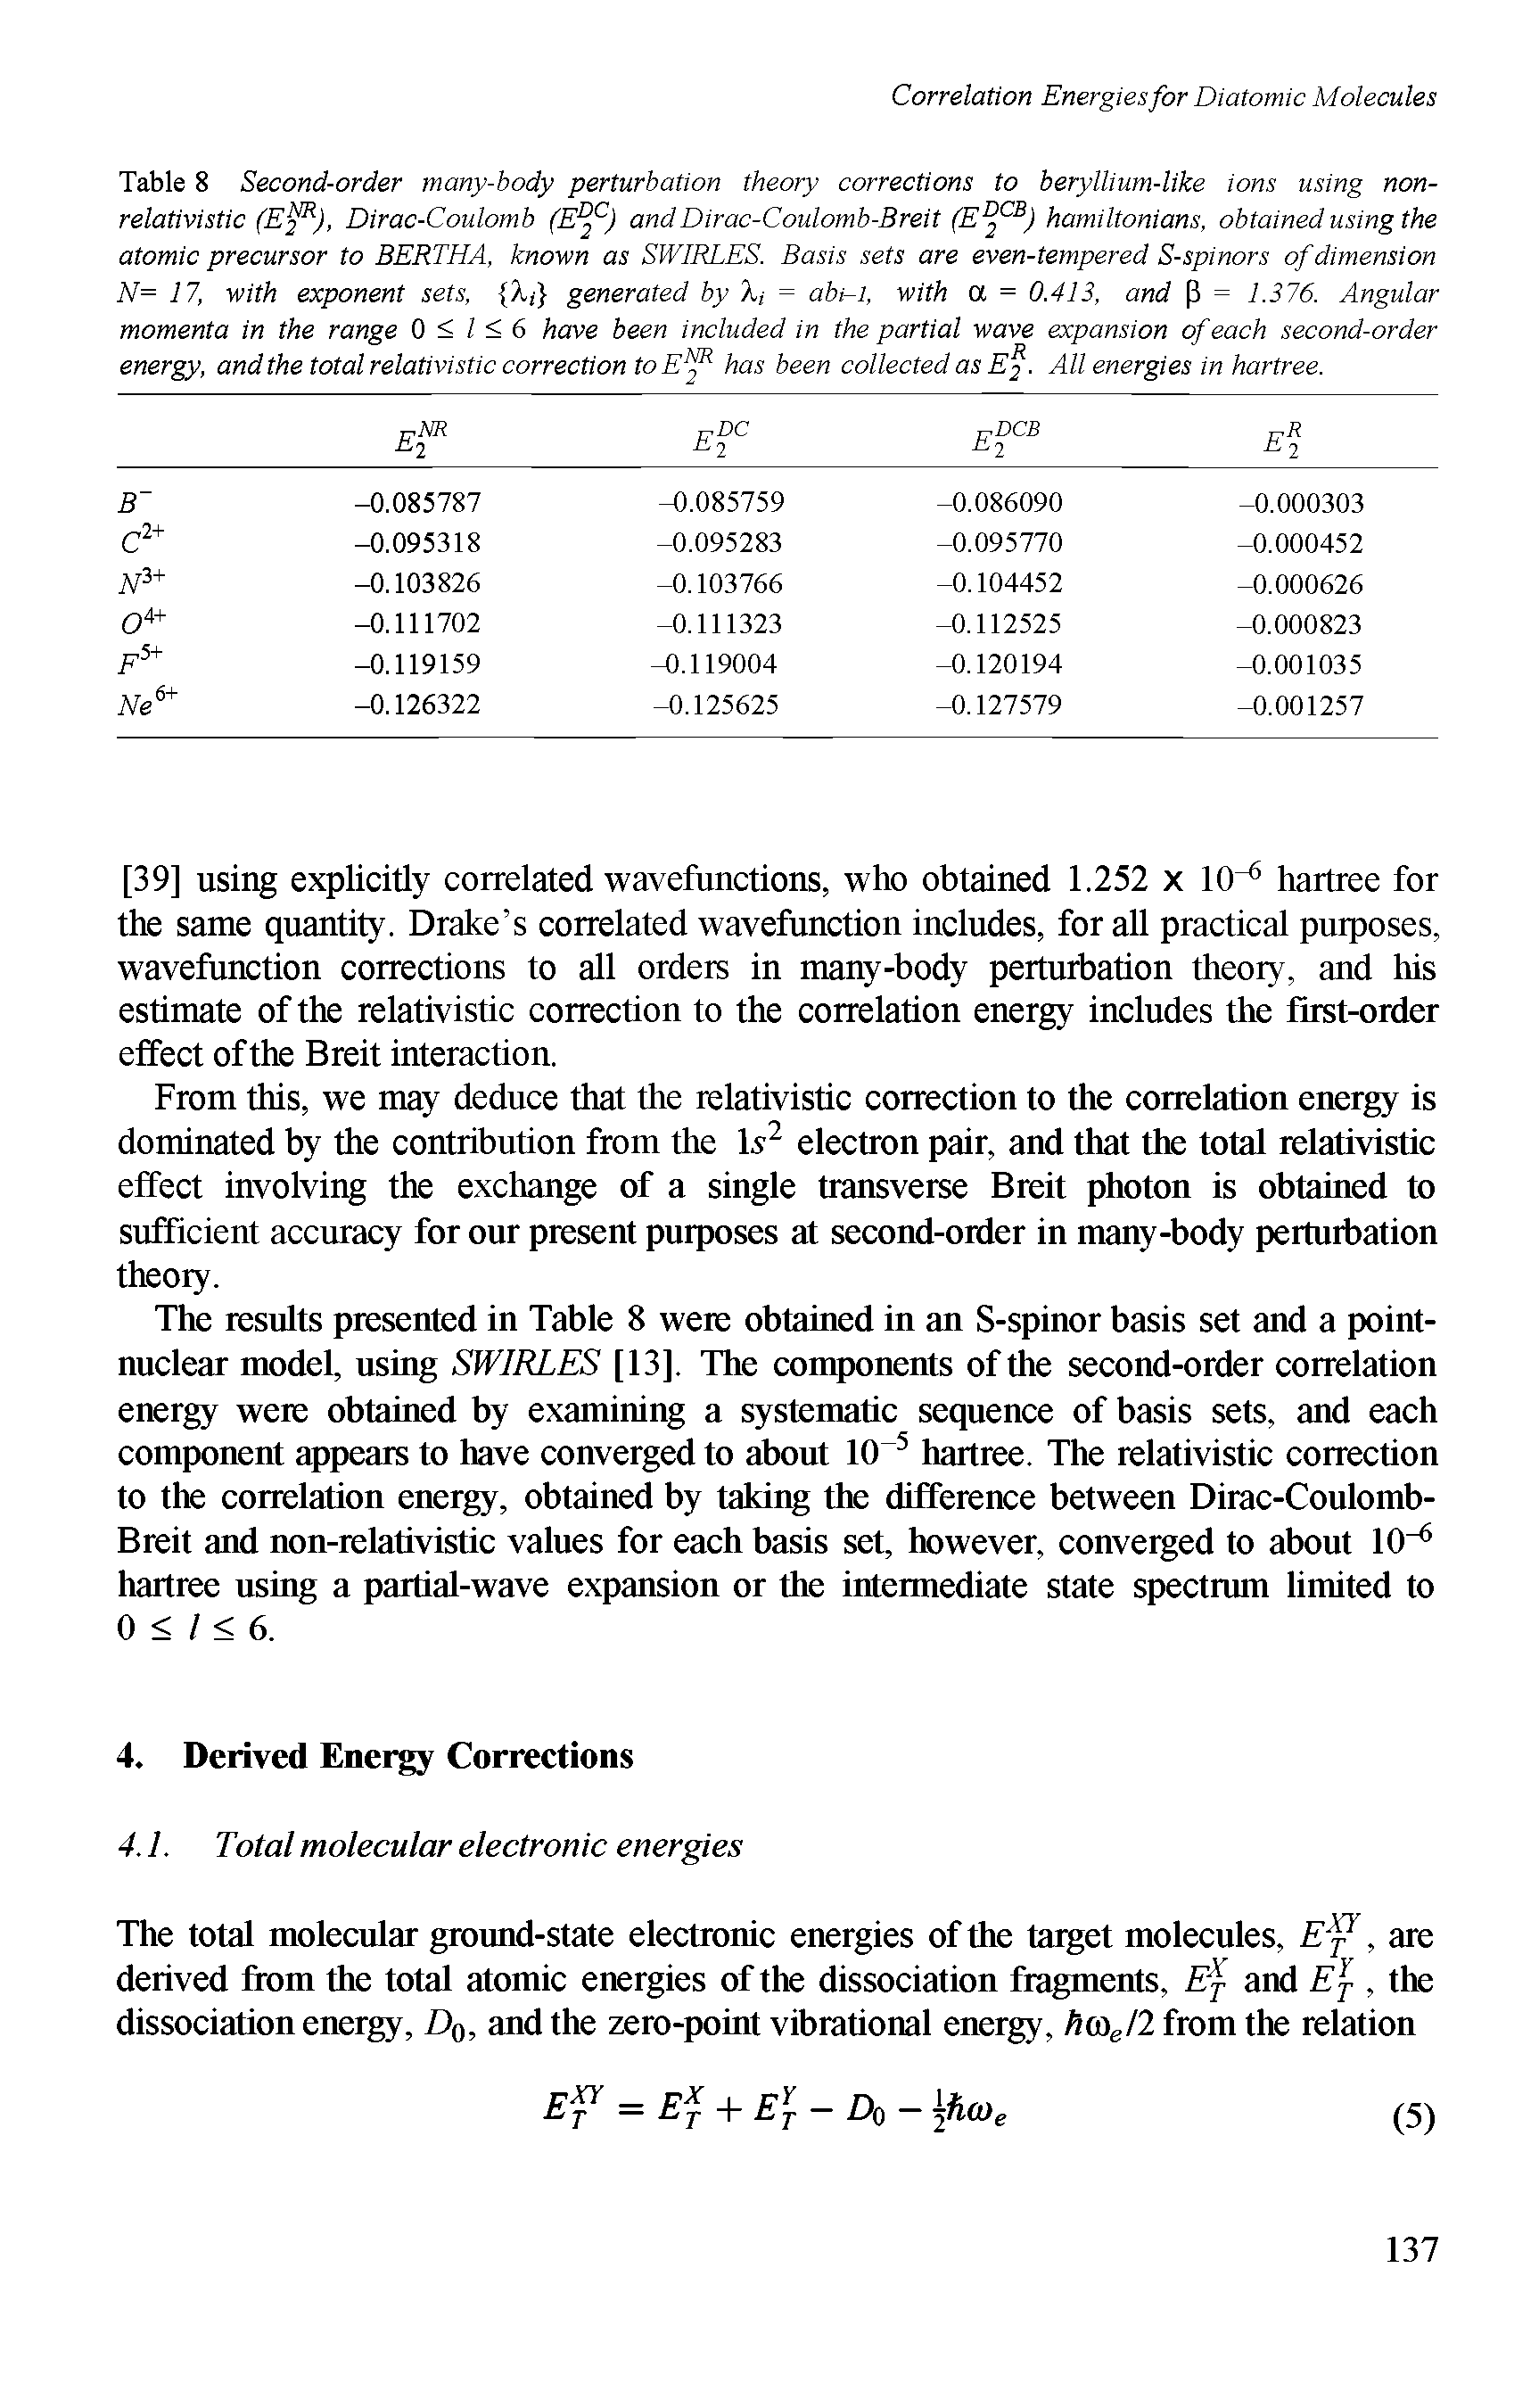 Table 8 Second-order many-body perturbation theory corrections to beryllium-like ions using non-relativistic (E ), Dirac-Coulomb (E ) andDirac-Coulomb-Breit hamiltonians, obtained using the...